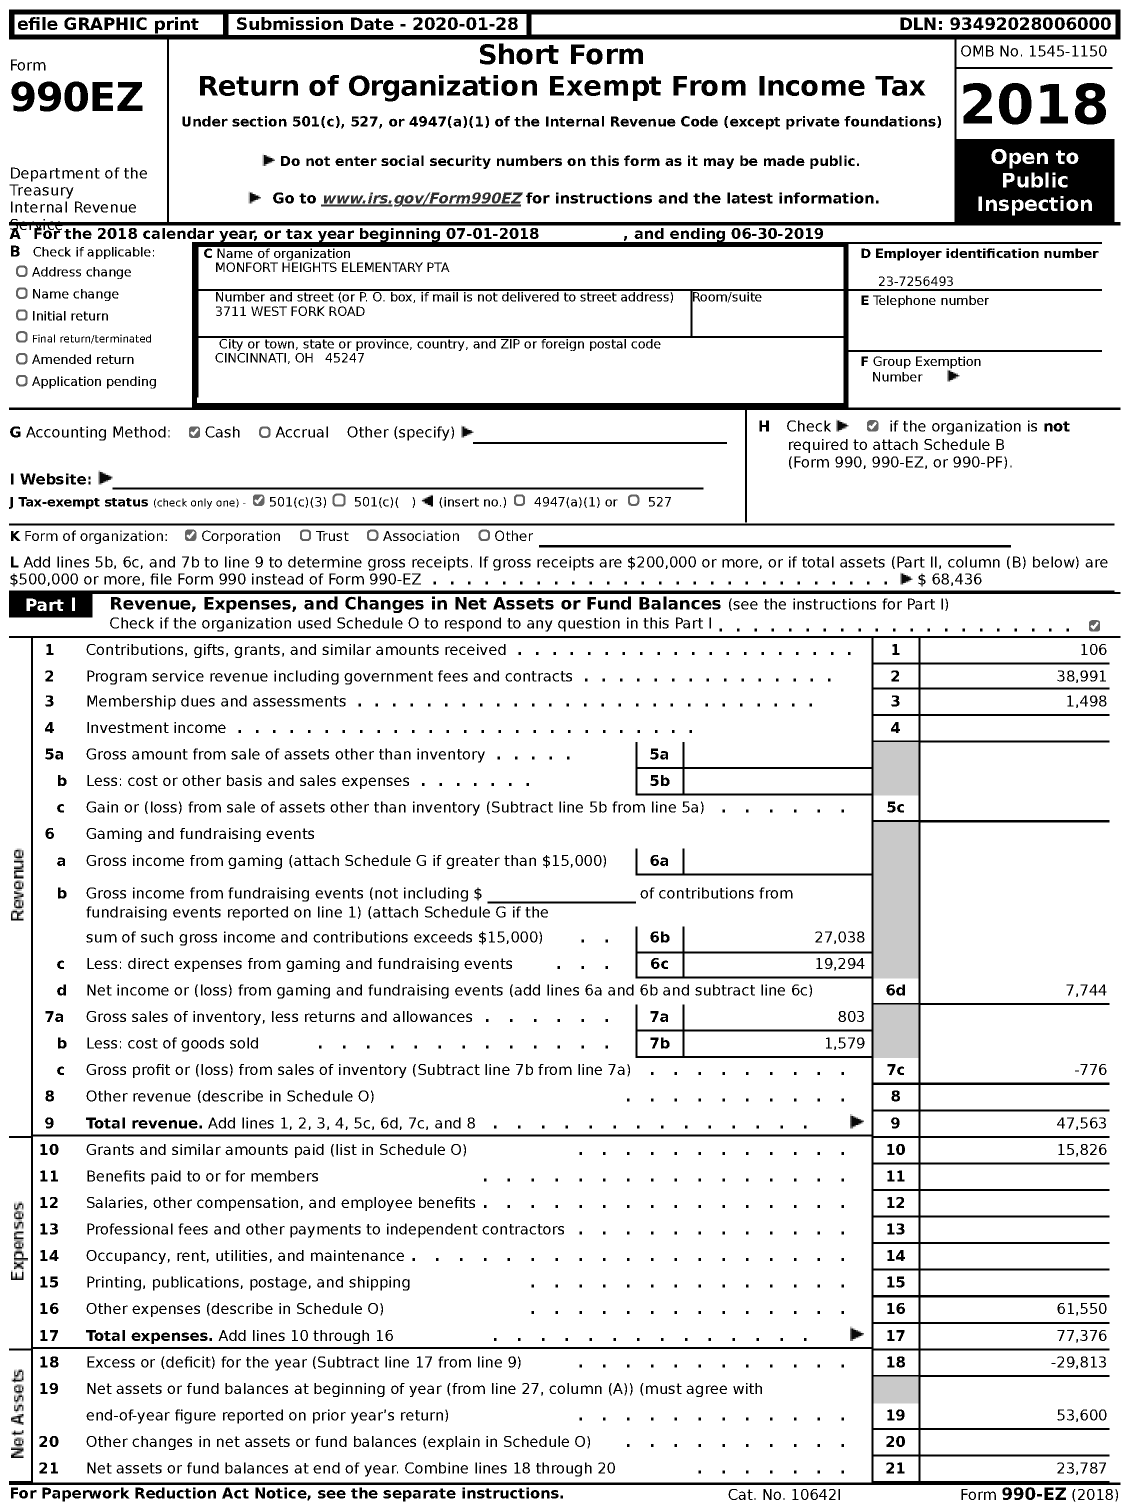 Image of first page of 2018 Form 990EZ for Monfort Heights Elementary PTA